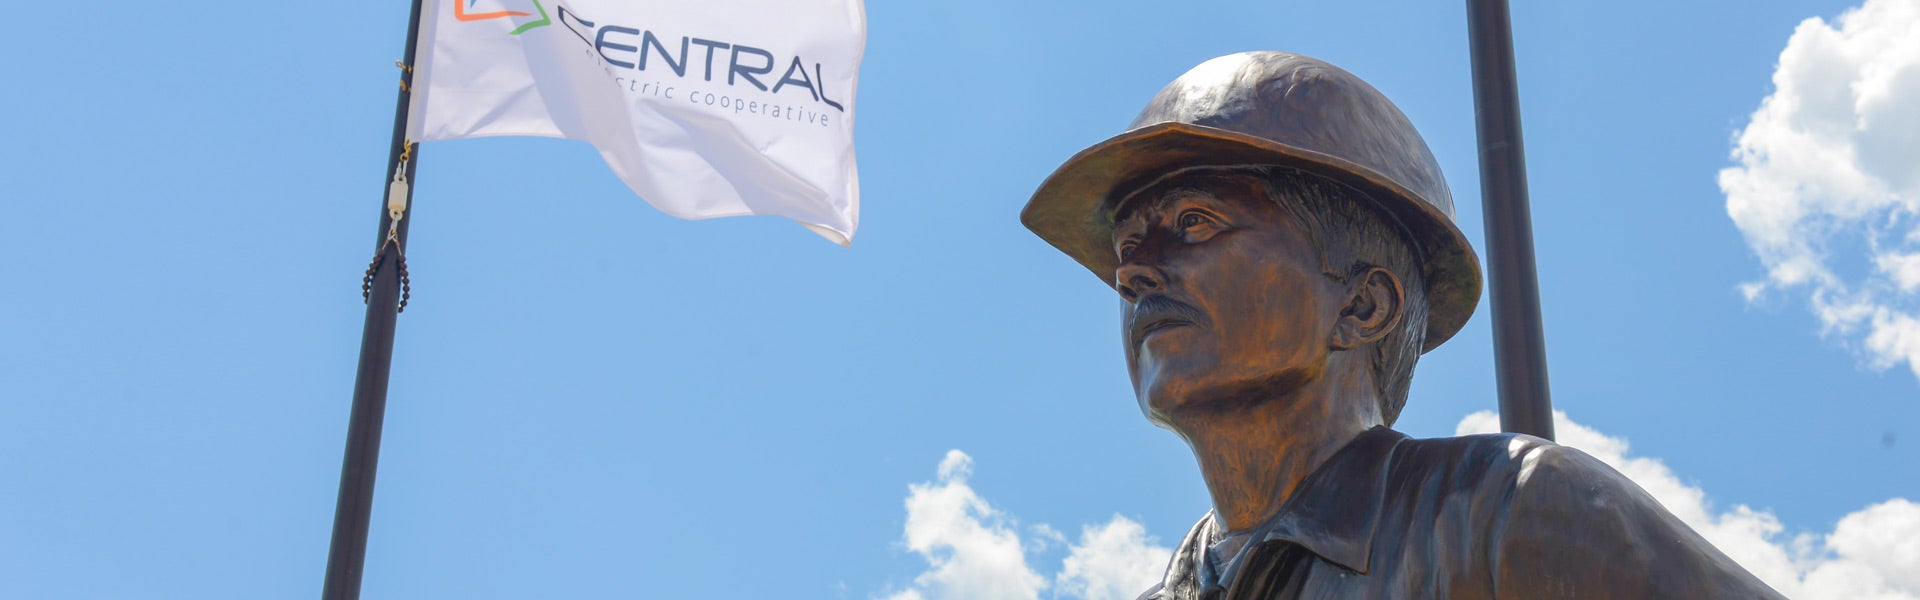 Photo of lineman statue with Central flag in the background